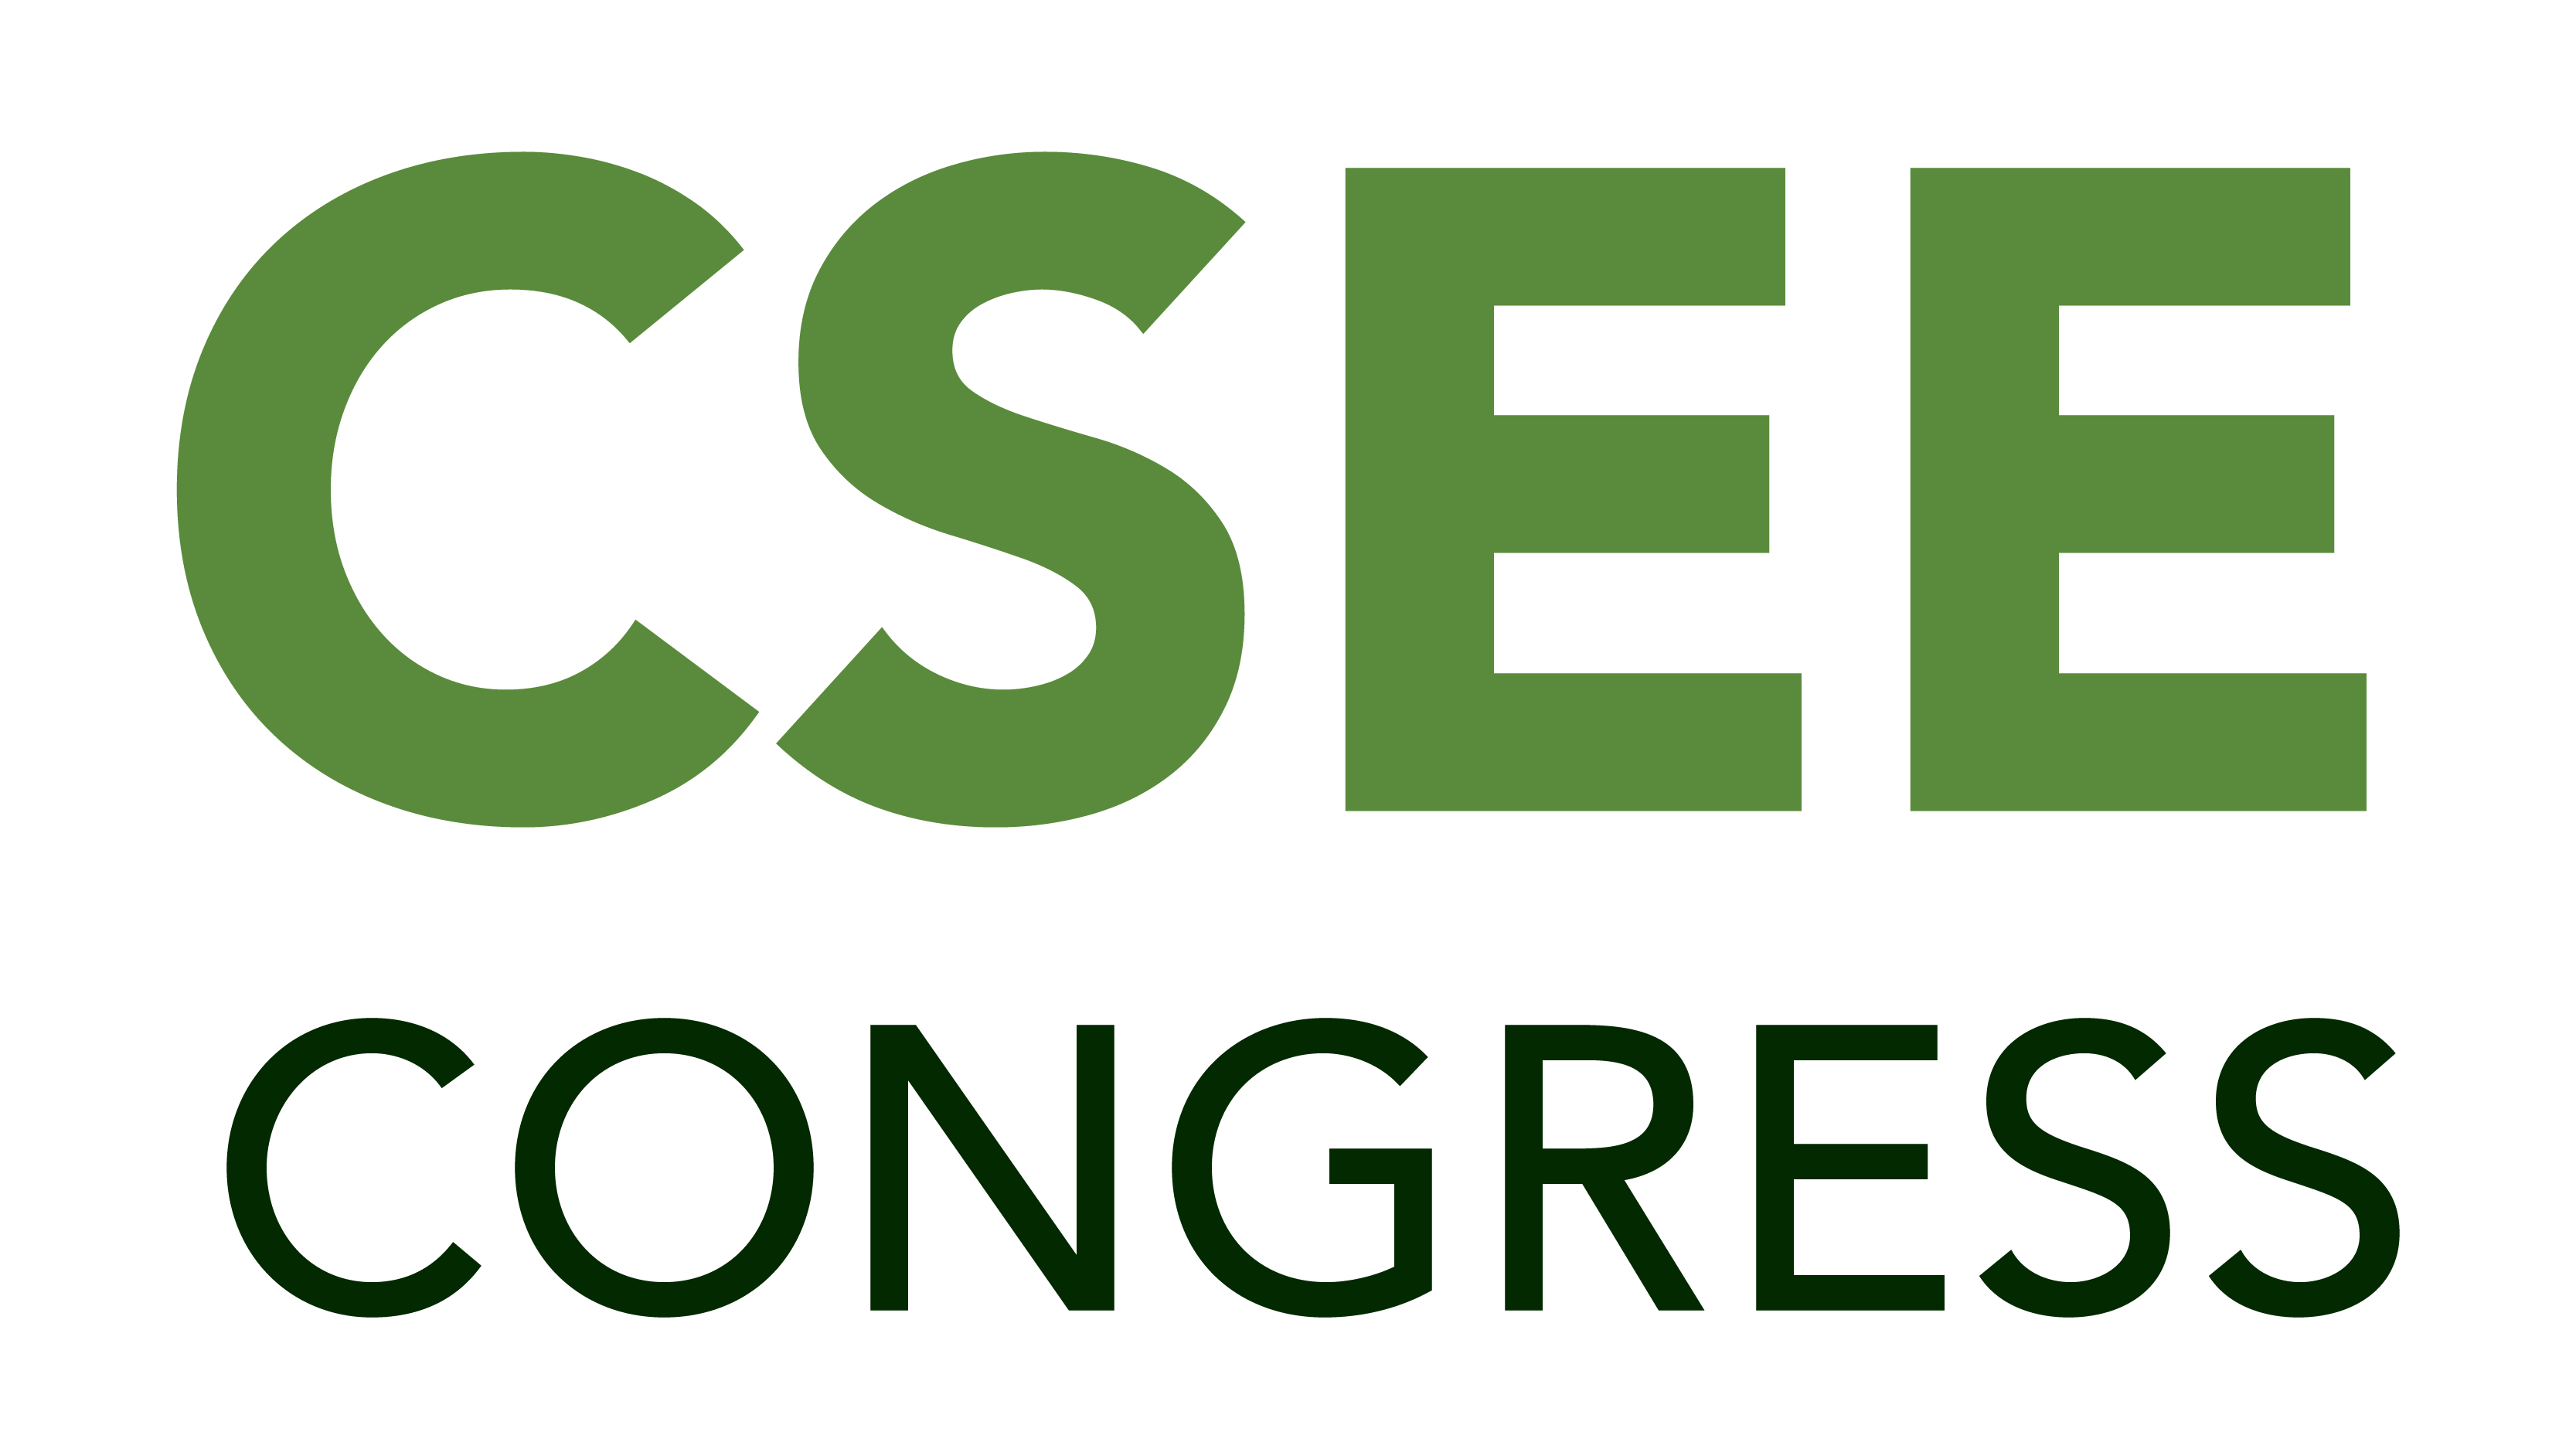 7th World Congress on Civil, Structural, and Environmental Engineering, Lisbon, Portugal, April 10 - 12, 2022